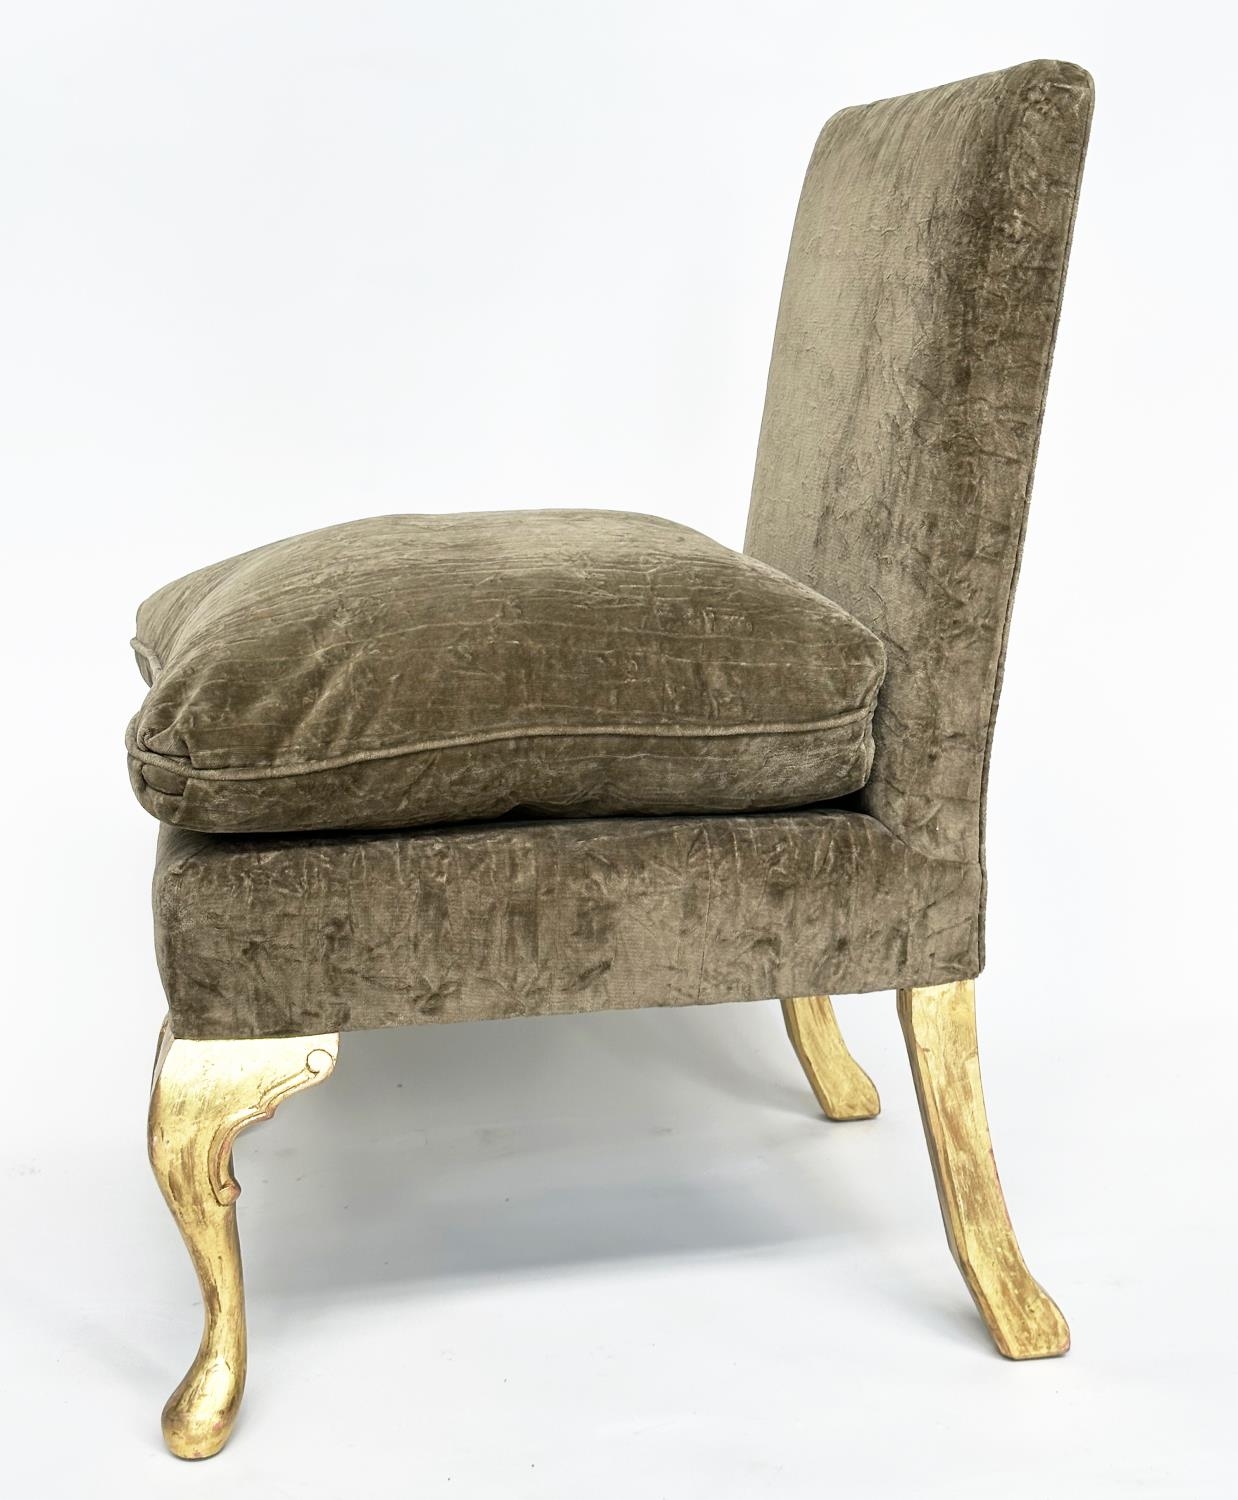 GEORGE SMITH SIDE CHAIR, teal green cut velvet upholstery and hand leaf gilded supports, 67cm W. - Image 4 of 8